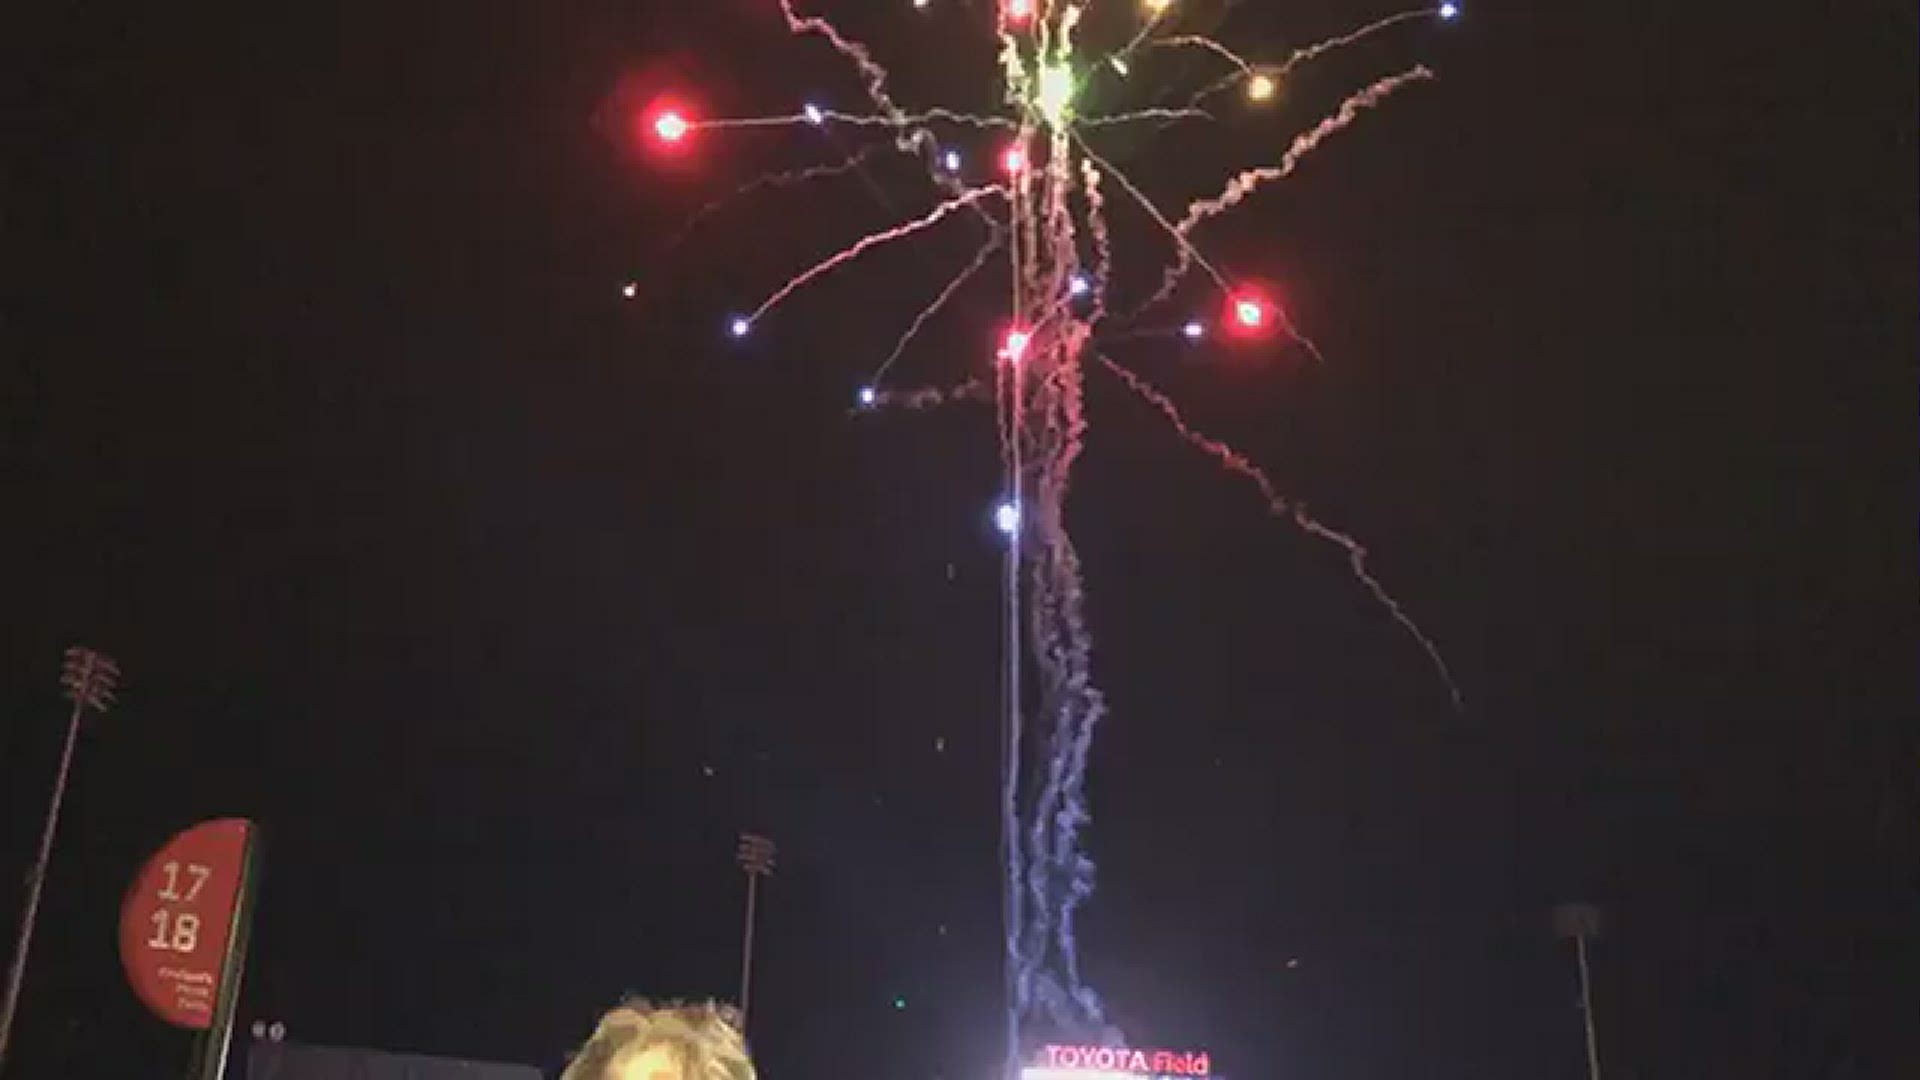 The Rocket City Trash Pandas celebrated their home opener with a huge fireworks show.